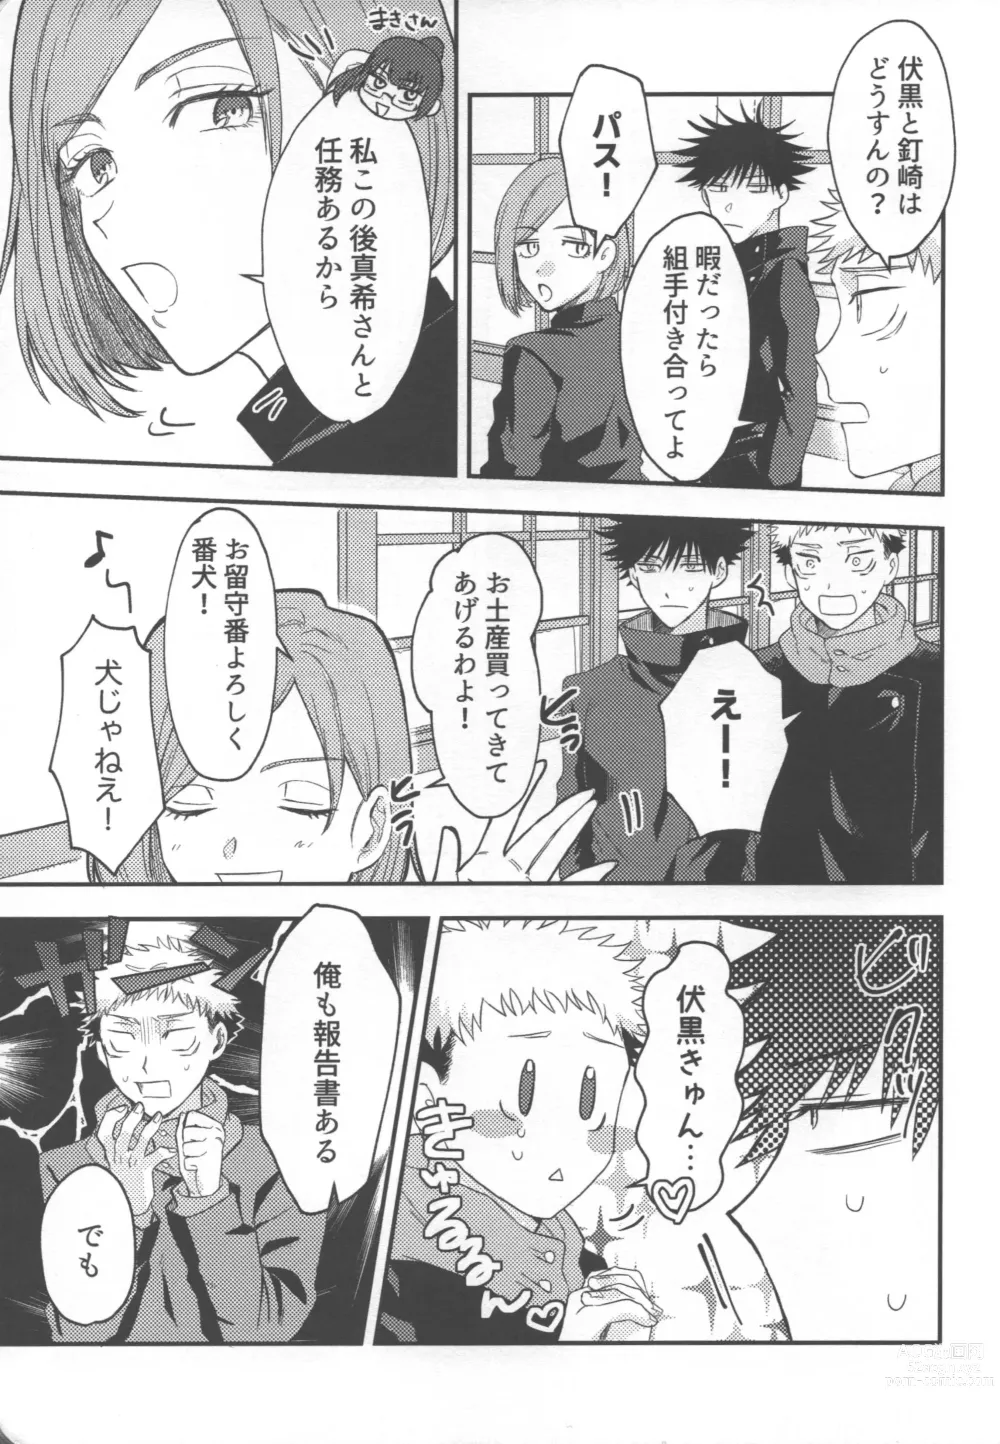 Page 6 of doujinshi Dont Look at ME Like That.